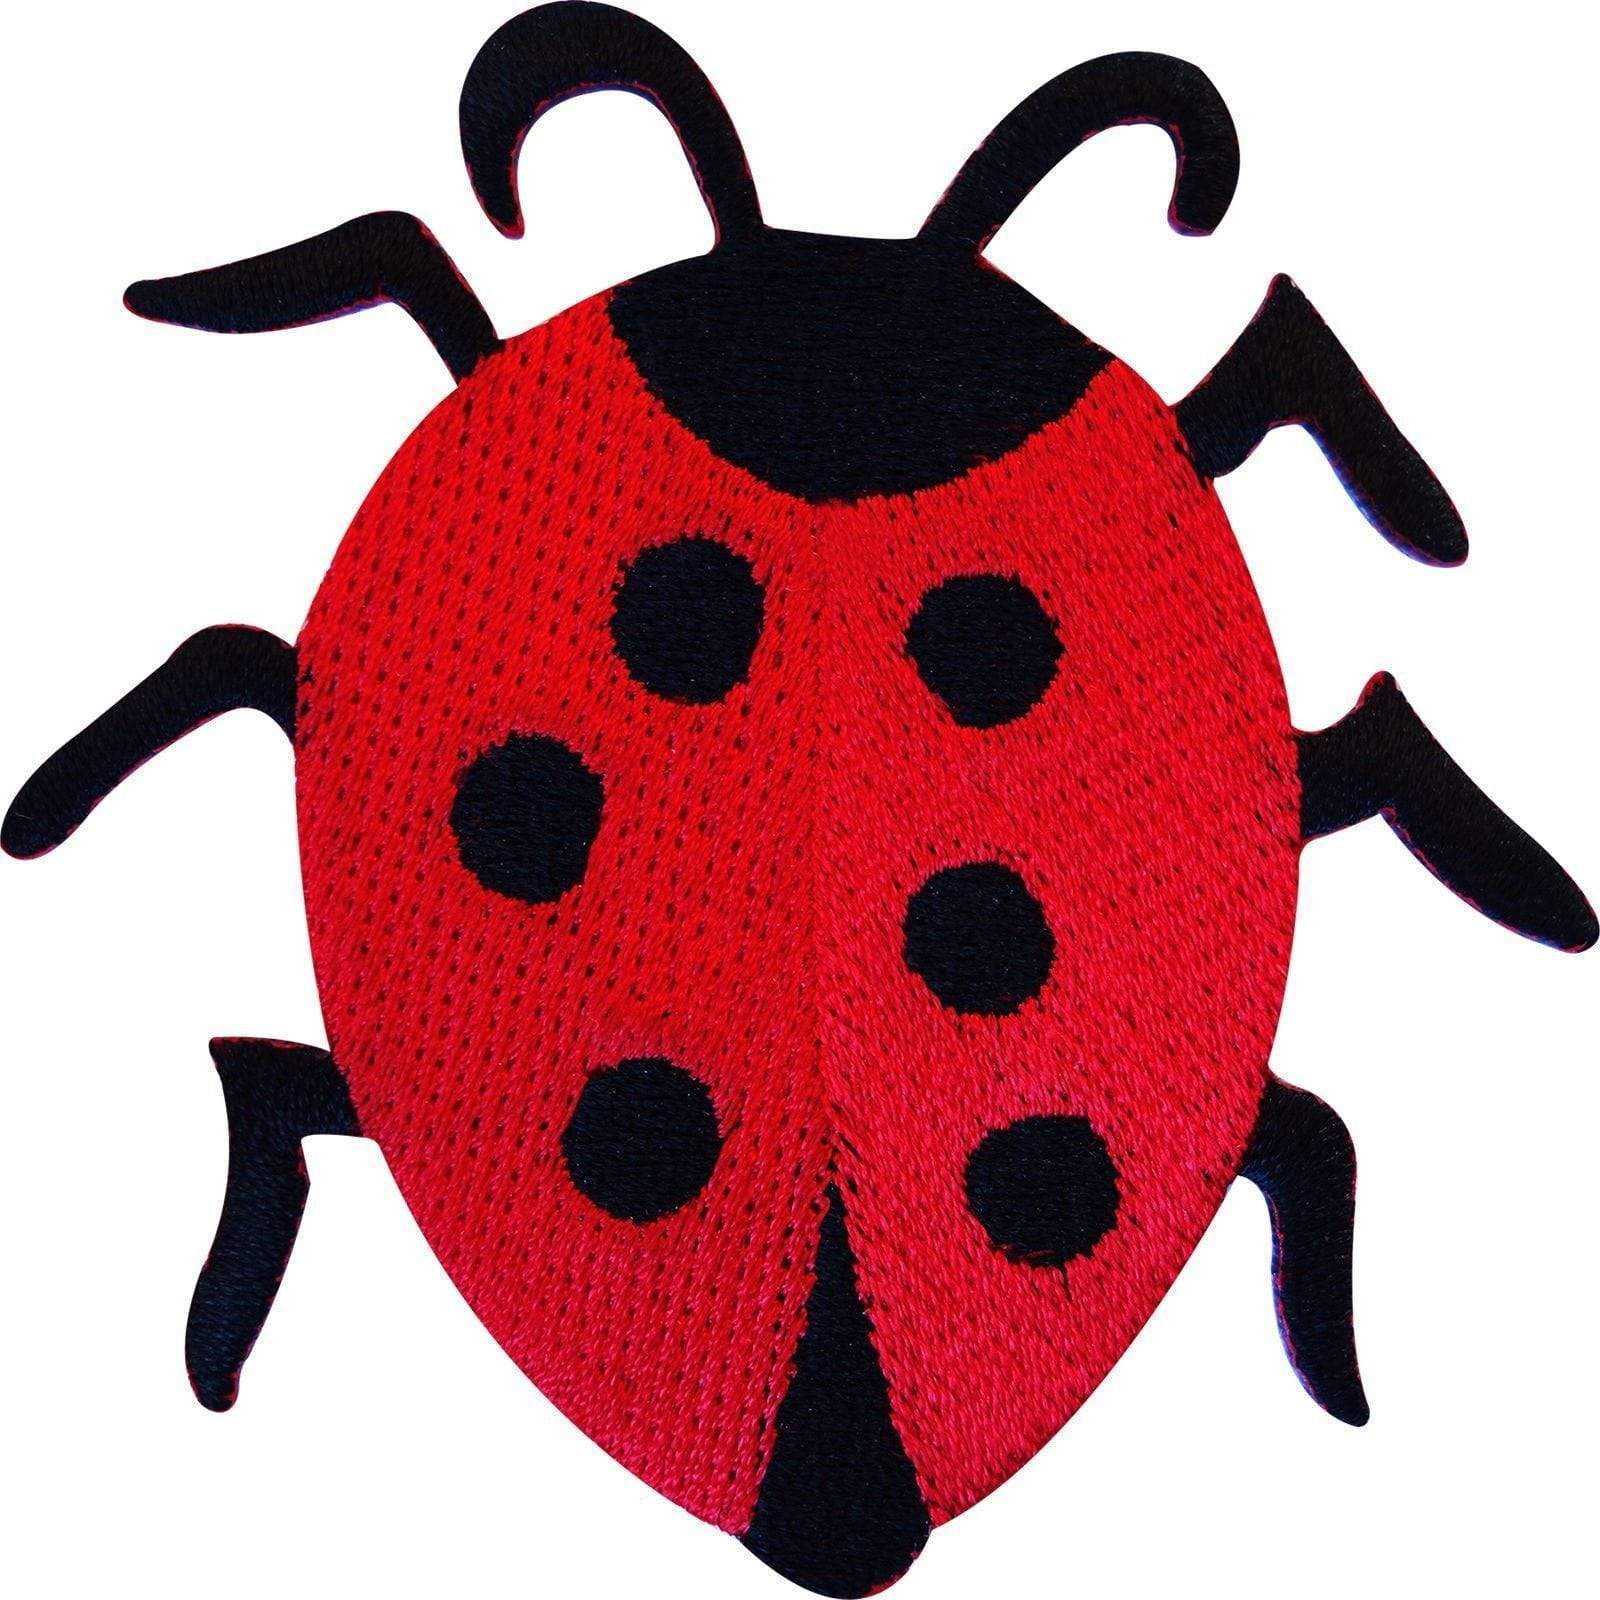 Embroidered Iron On Ladybird Patch Sew On Ladybug Badge Embroidery Crafts Sewing